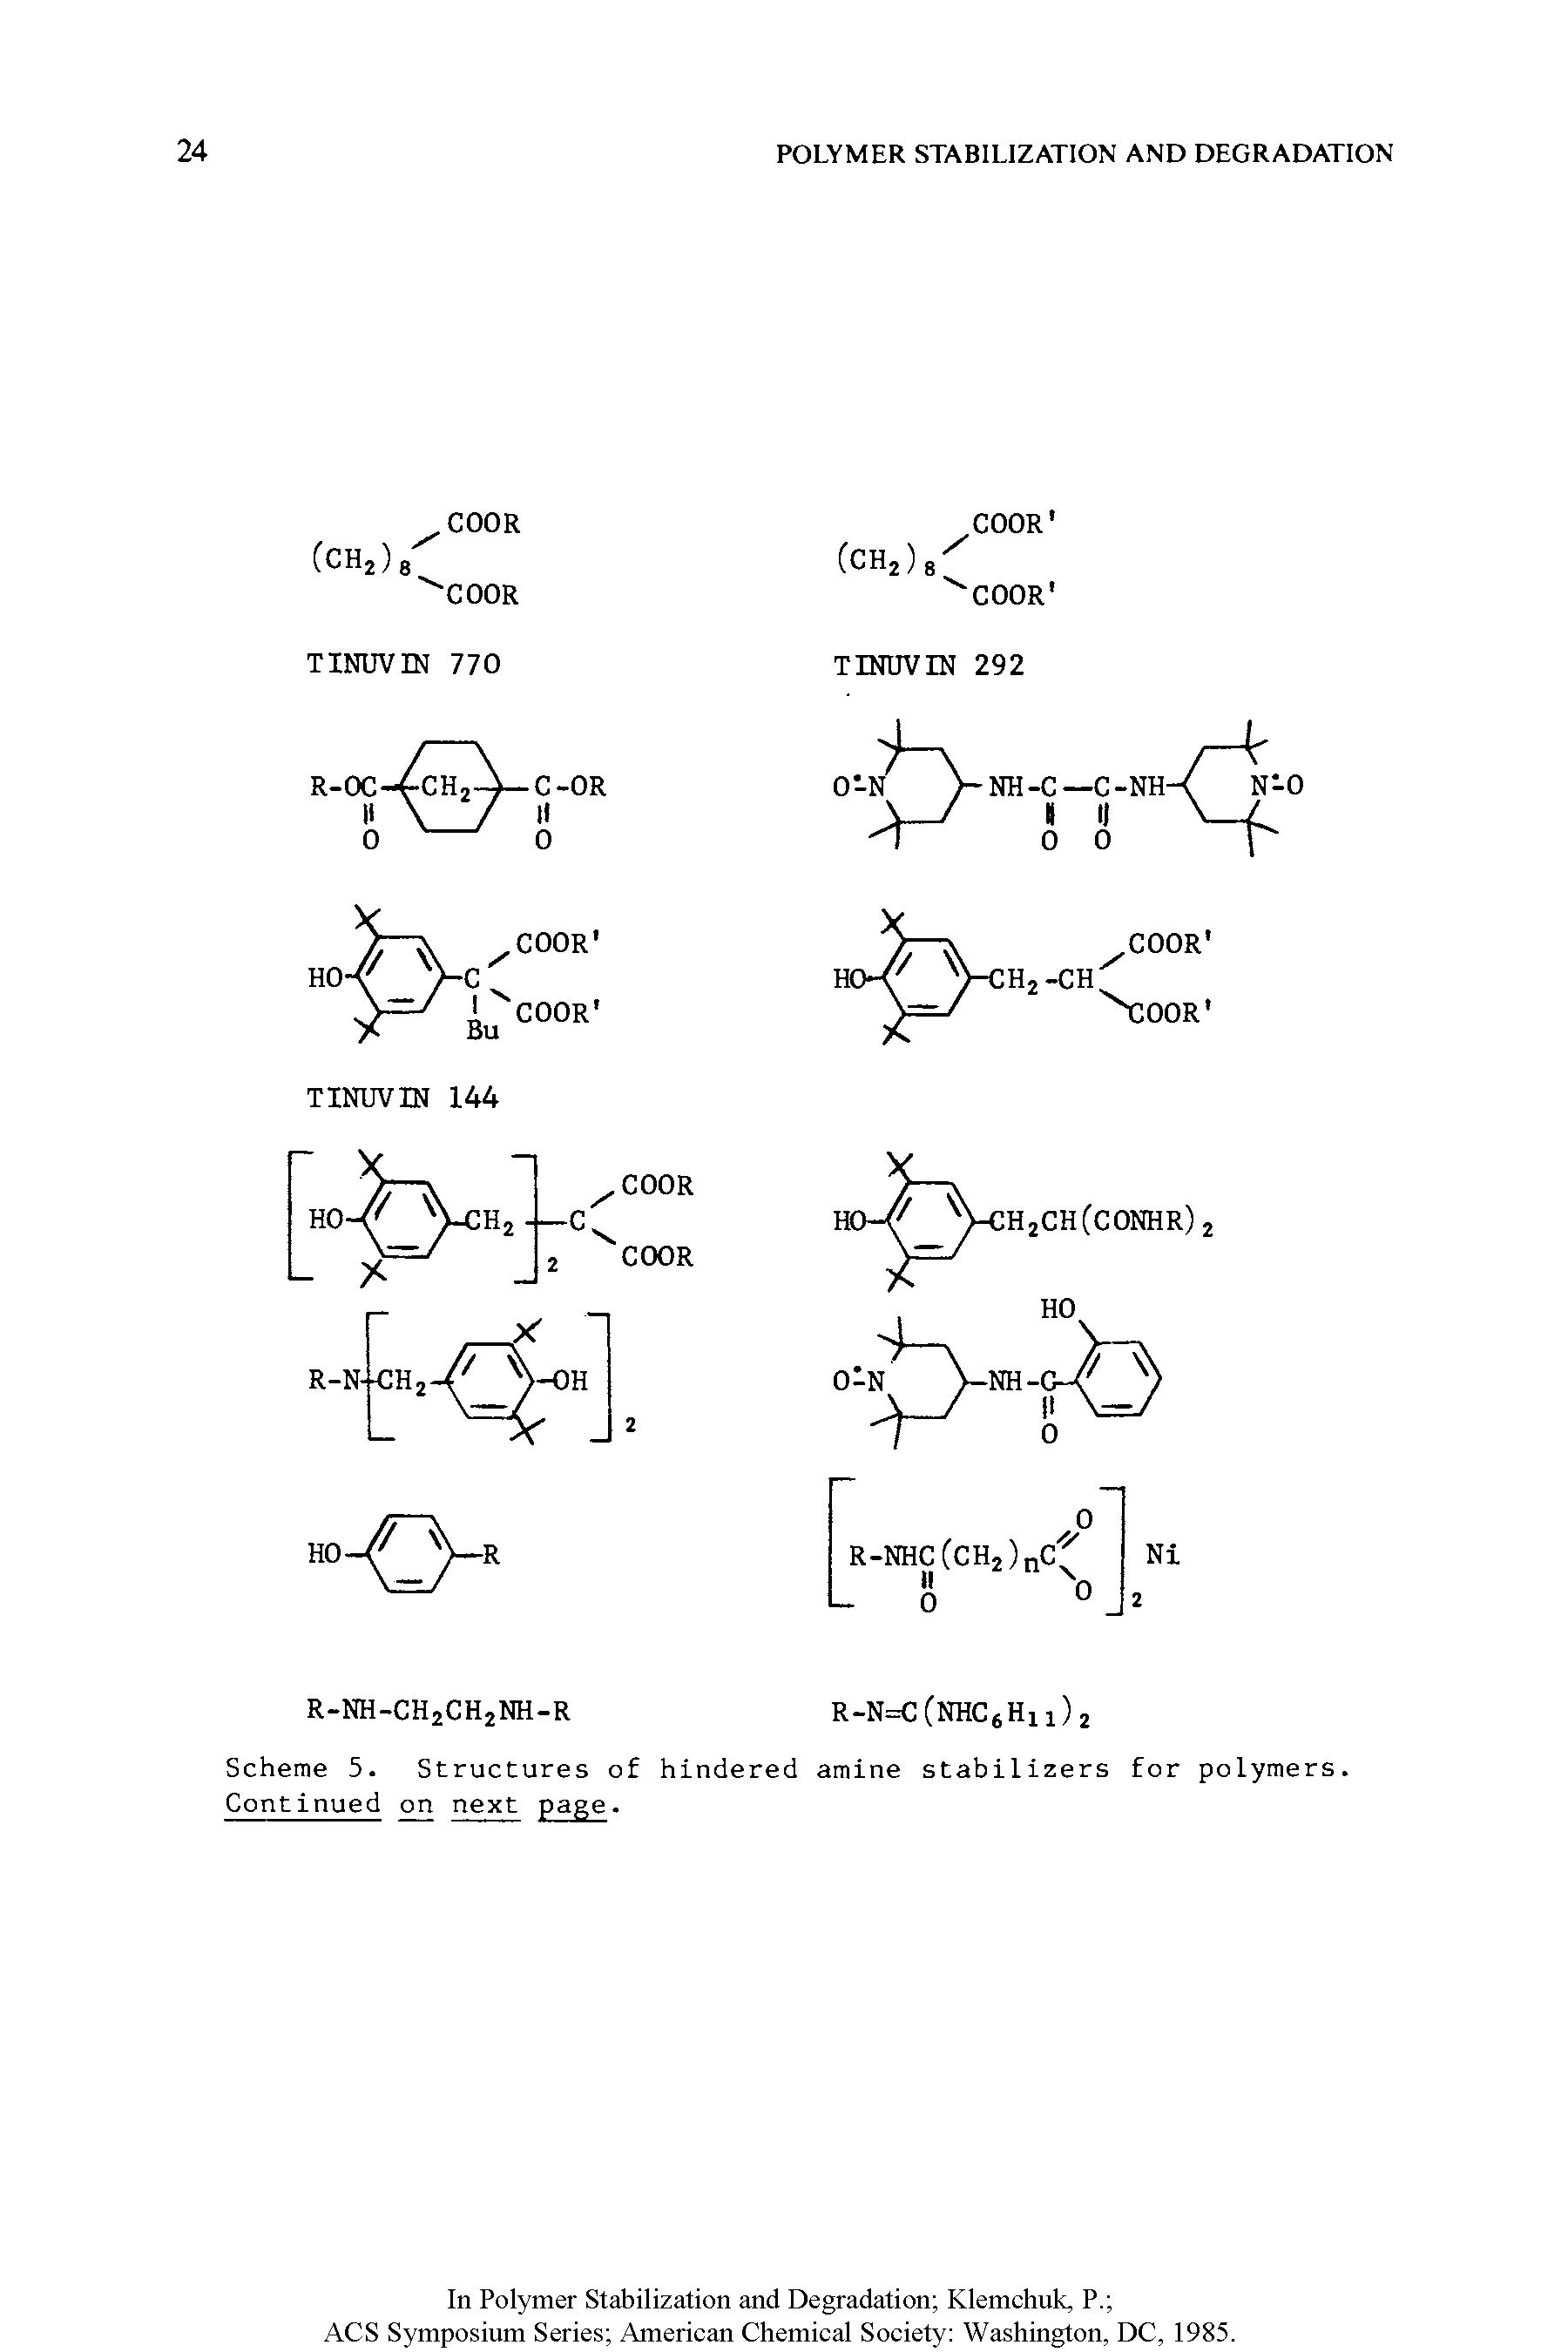 Scheme 5. Structures of hindered amine stabilizers for polymers. Continued on next page.